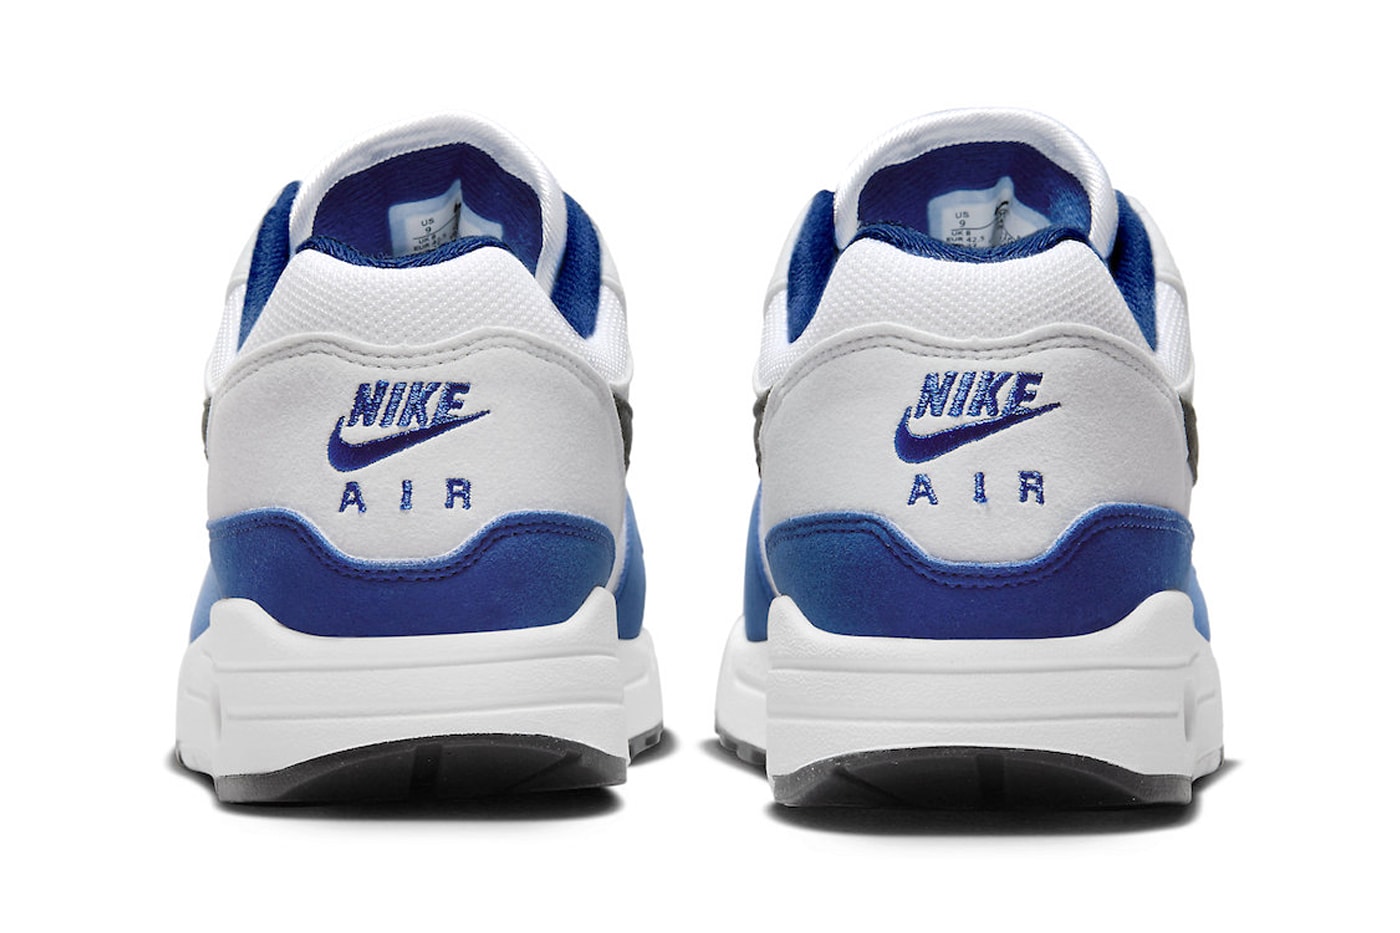 Official Look Nike Air Max 1 "Deep Royal Blue" FD9082-100 White/Black-Deep Royal Blue shoes swoosh everyday sneakers runners running shoes comfortable